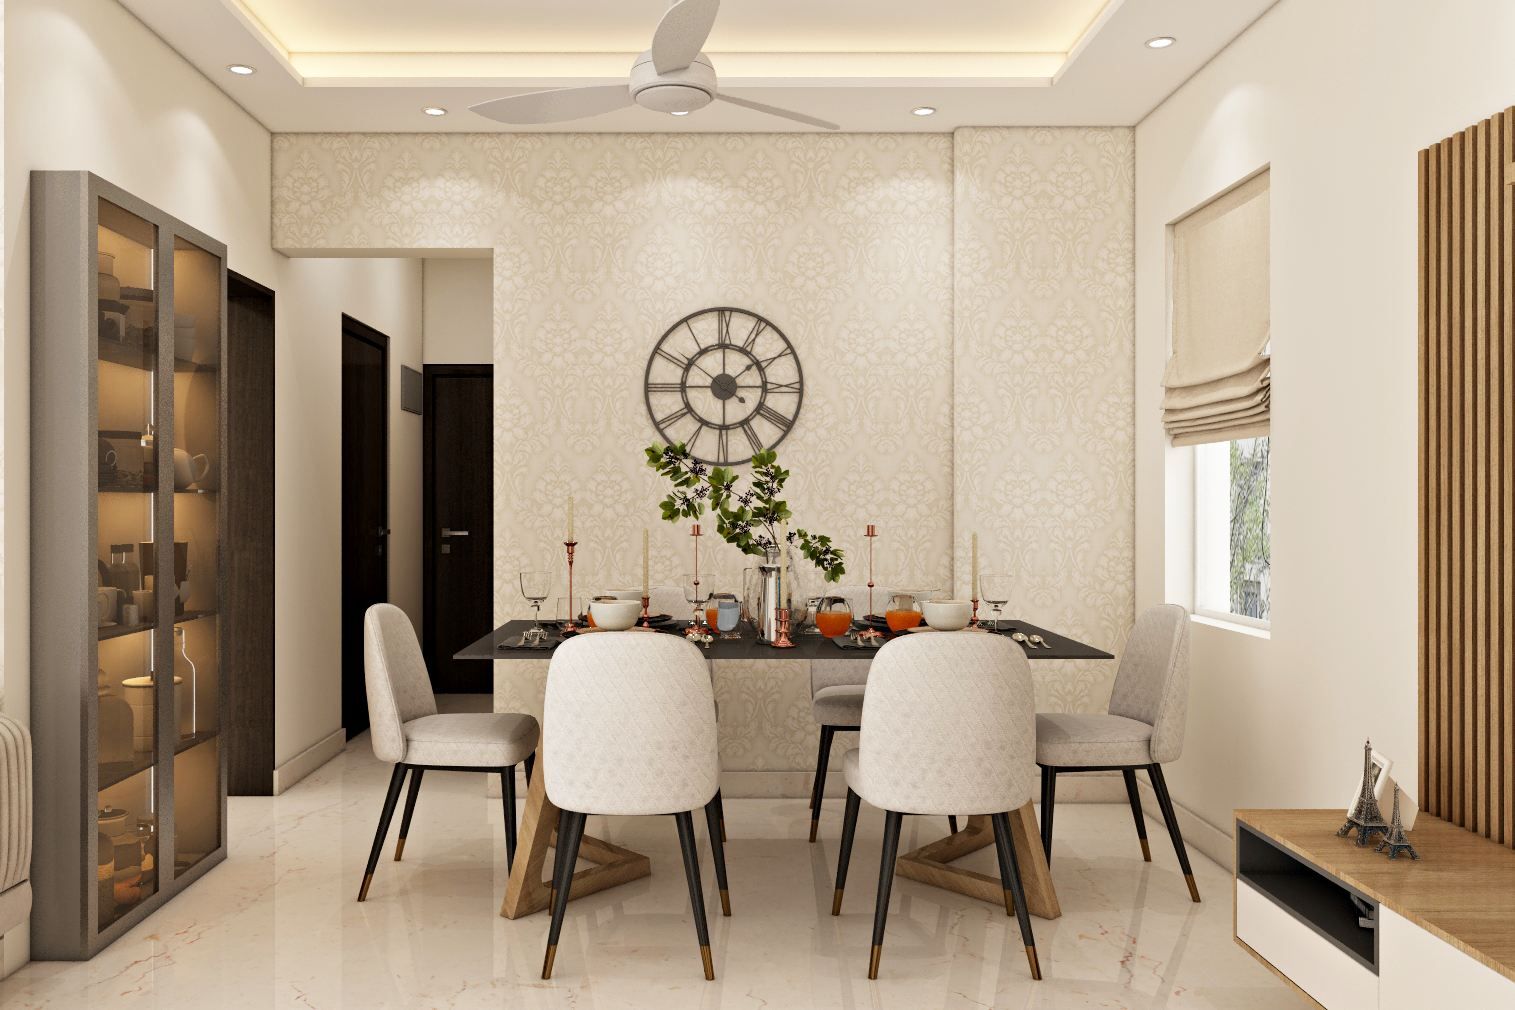 Contemporary Dining Room Design With Storage Unit And Crockery Unit